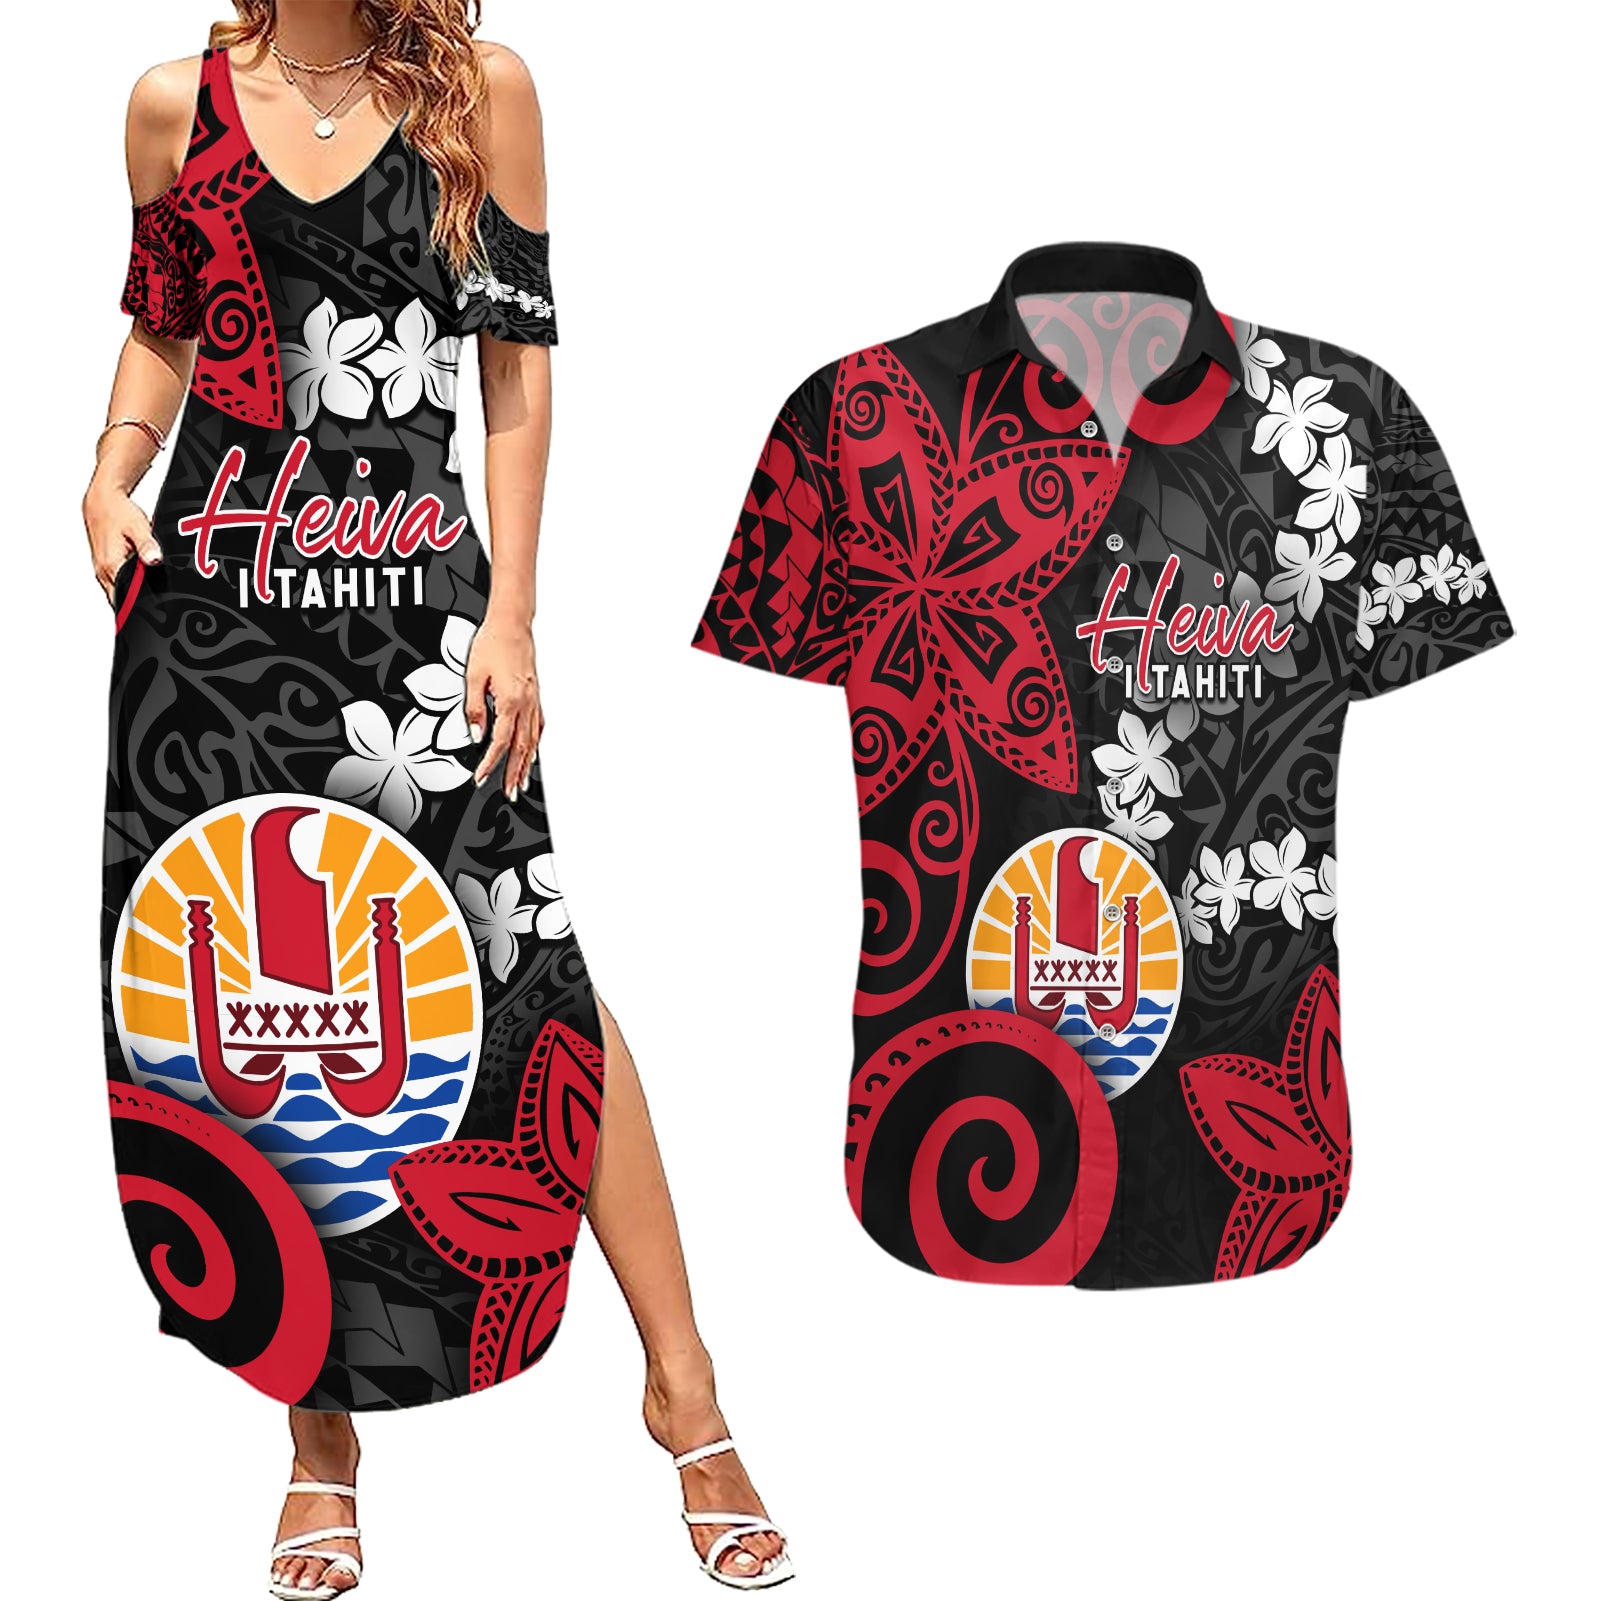 Tahiti Heiva Festival Couples Matching Summer Maxi Dress and Hawaiian Shirt Floral Pattern With Coat Of Arms